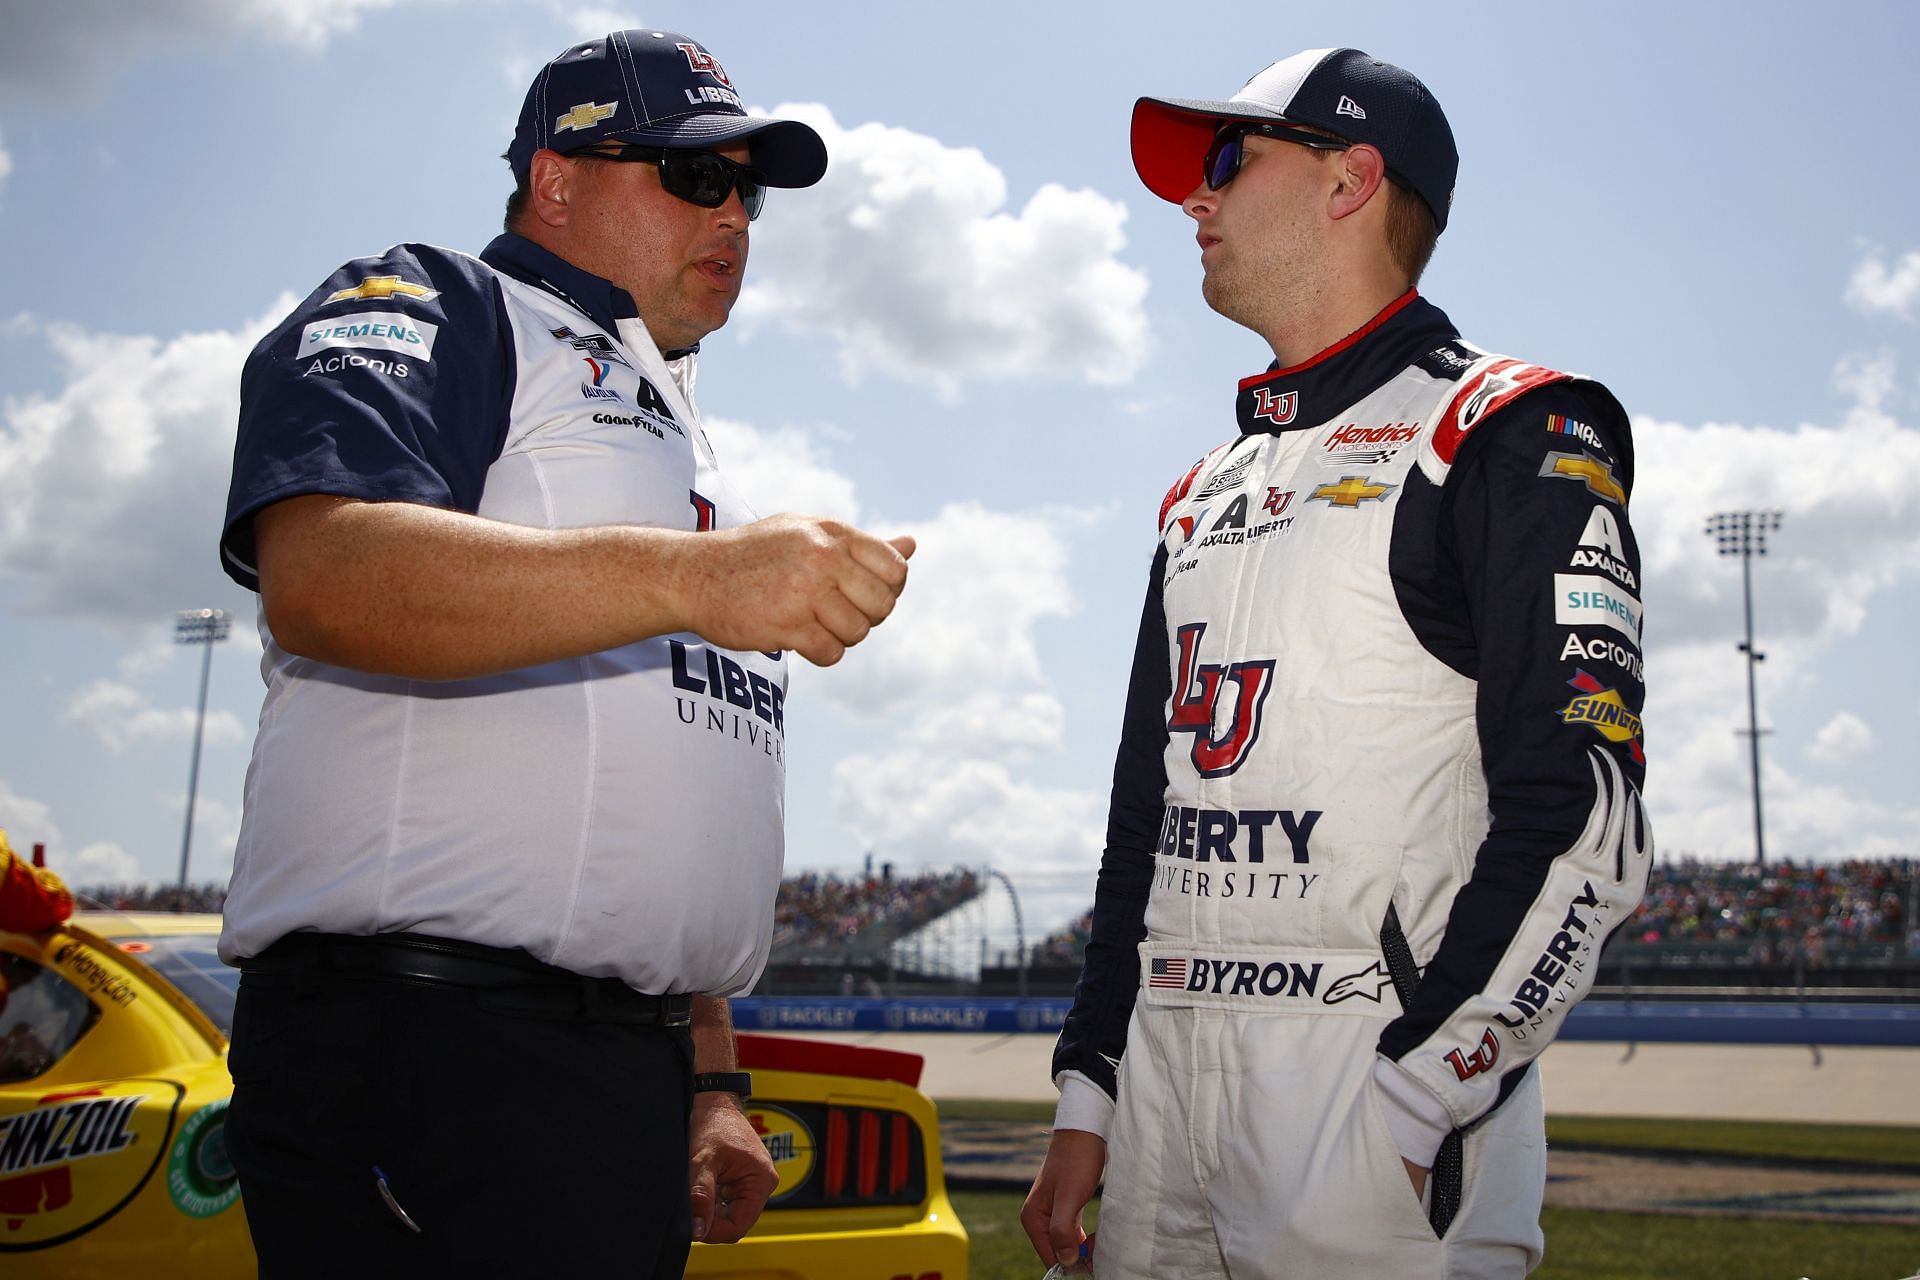 William Byron (right) and crew chief Rudy Fugle talk on the grid before the NASCAR Cup Series Ally 400 at Nashville Superspeedway